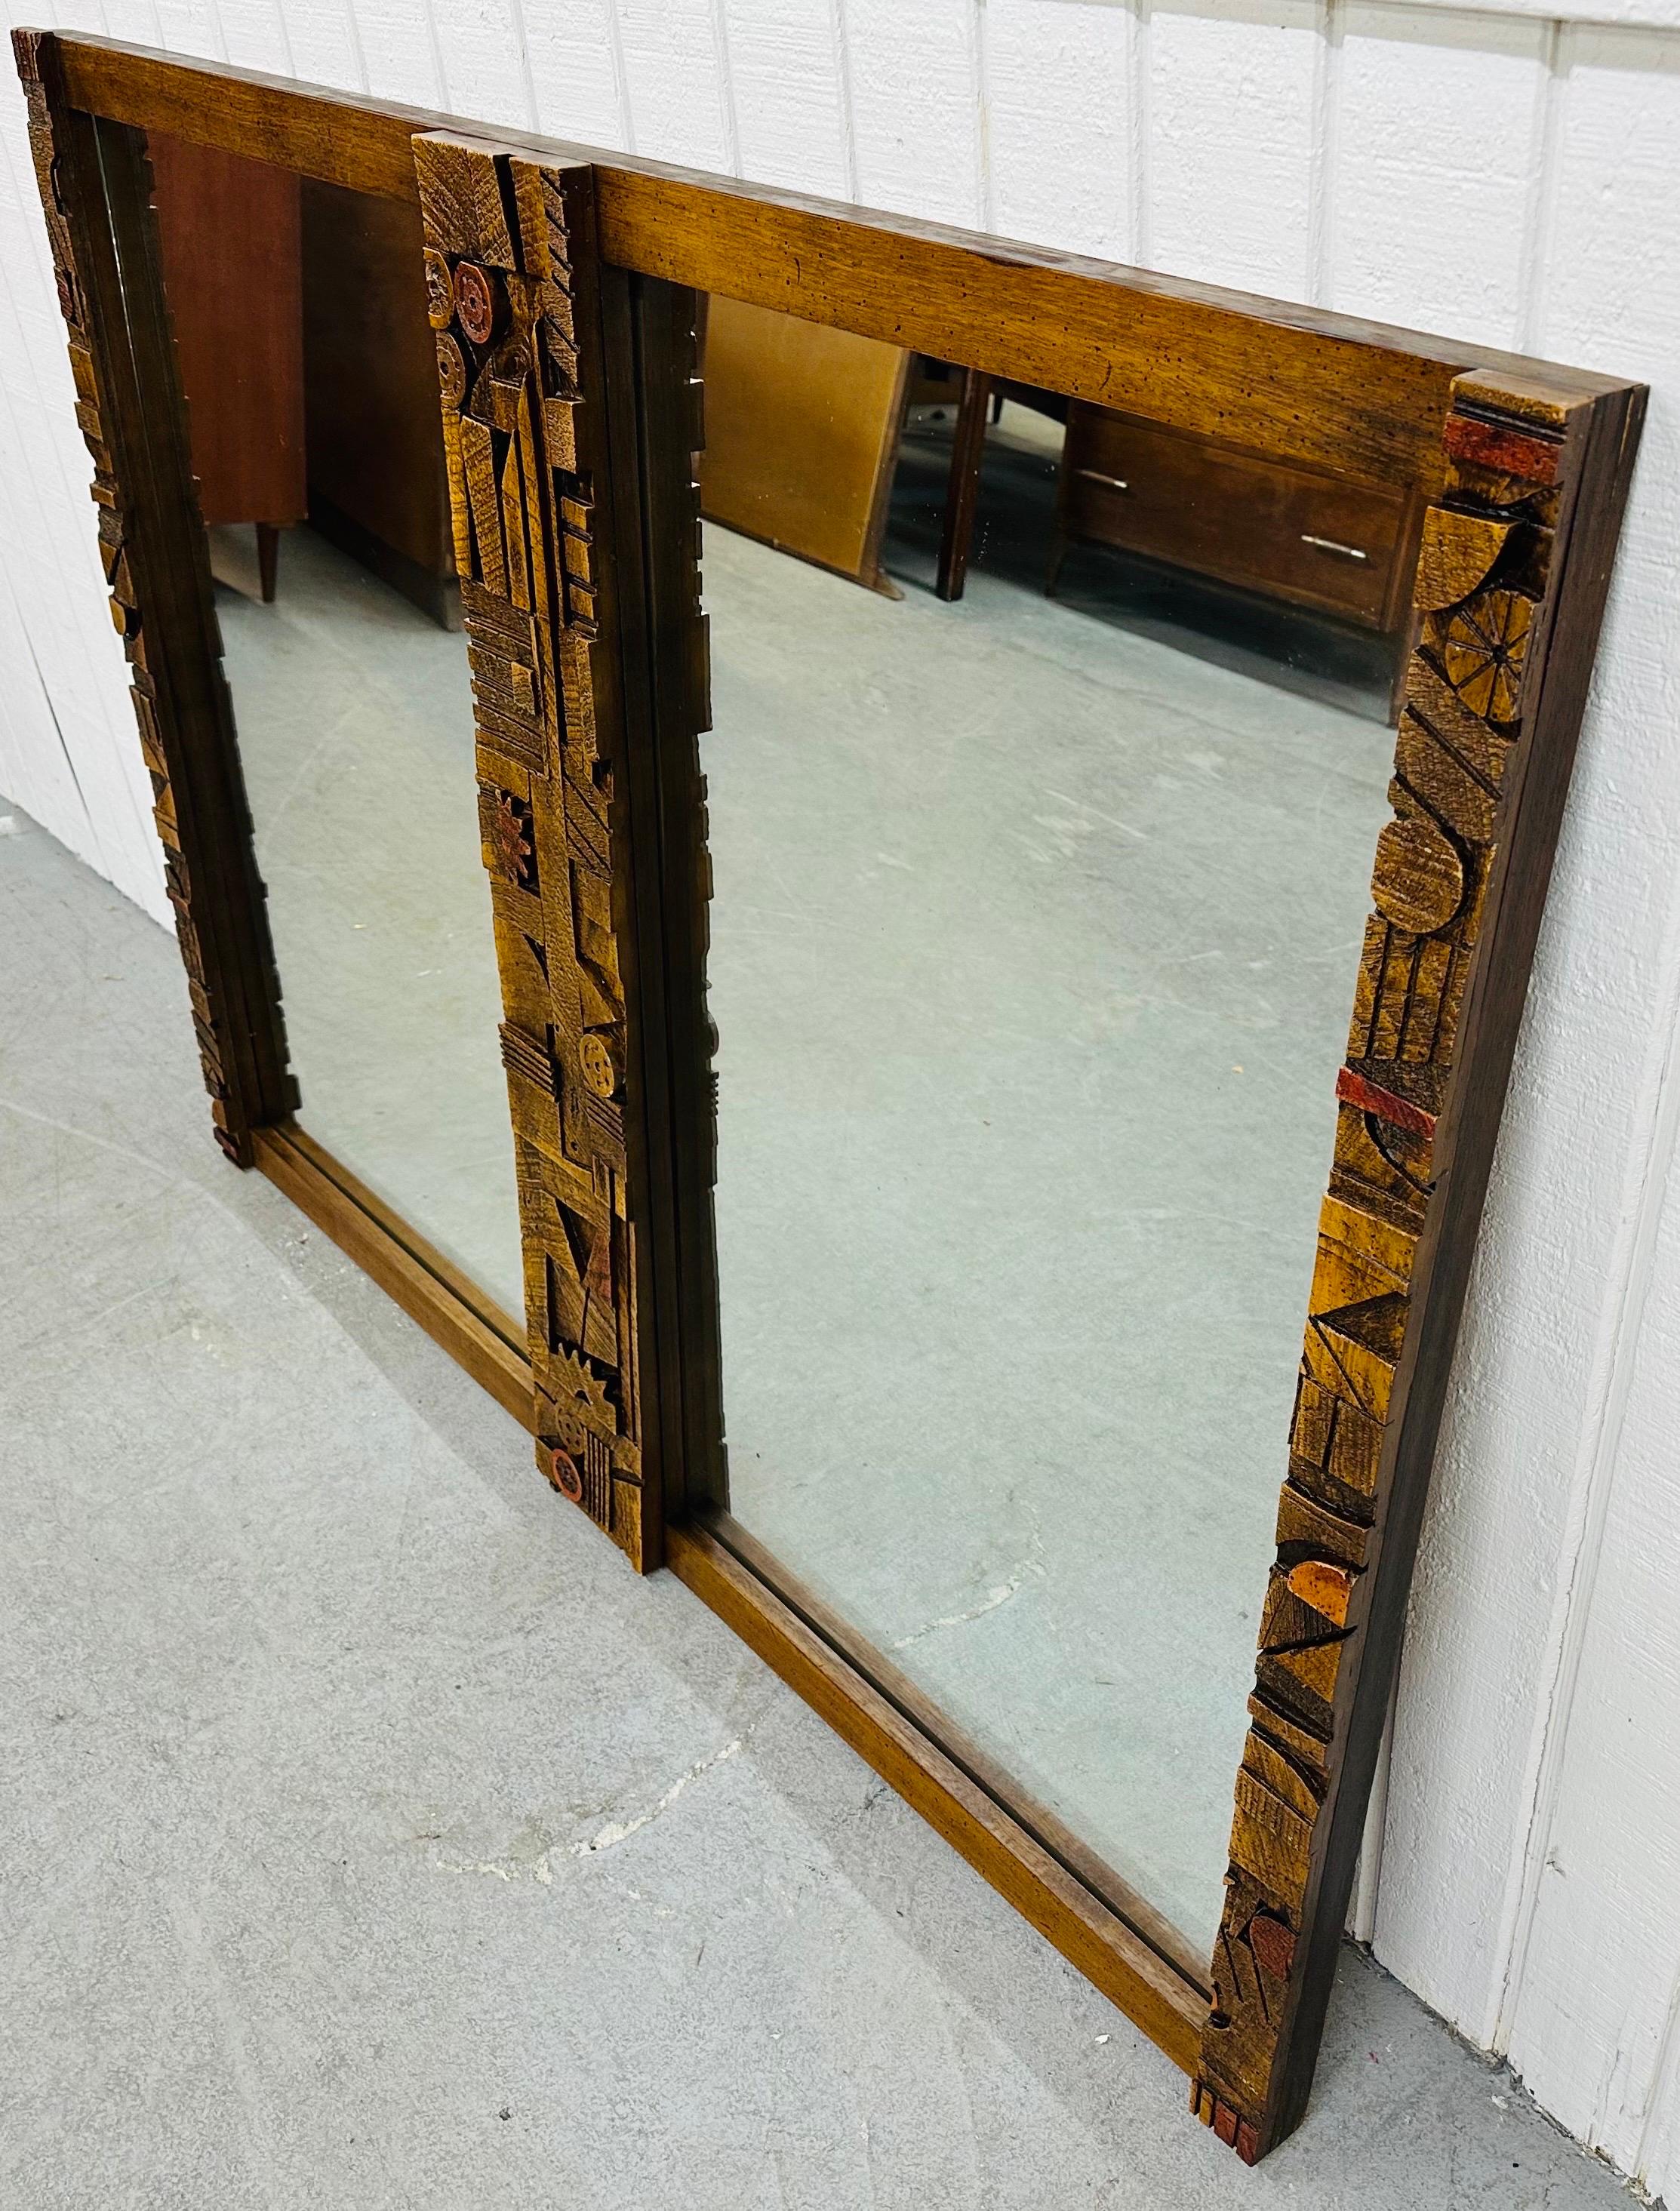 This listing is for a Mid-Century Modern Lane Pueblo Brutalist Wall Mirror. Featuring a rectangular double mirror design, brutalist geometrical shapes, and a beautiful walnut finish. This is an exceptional combination of quality and design by Lane!